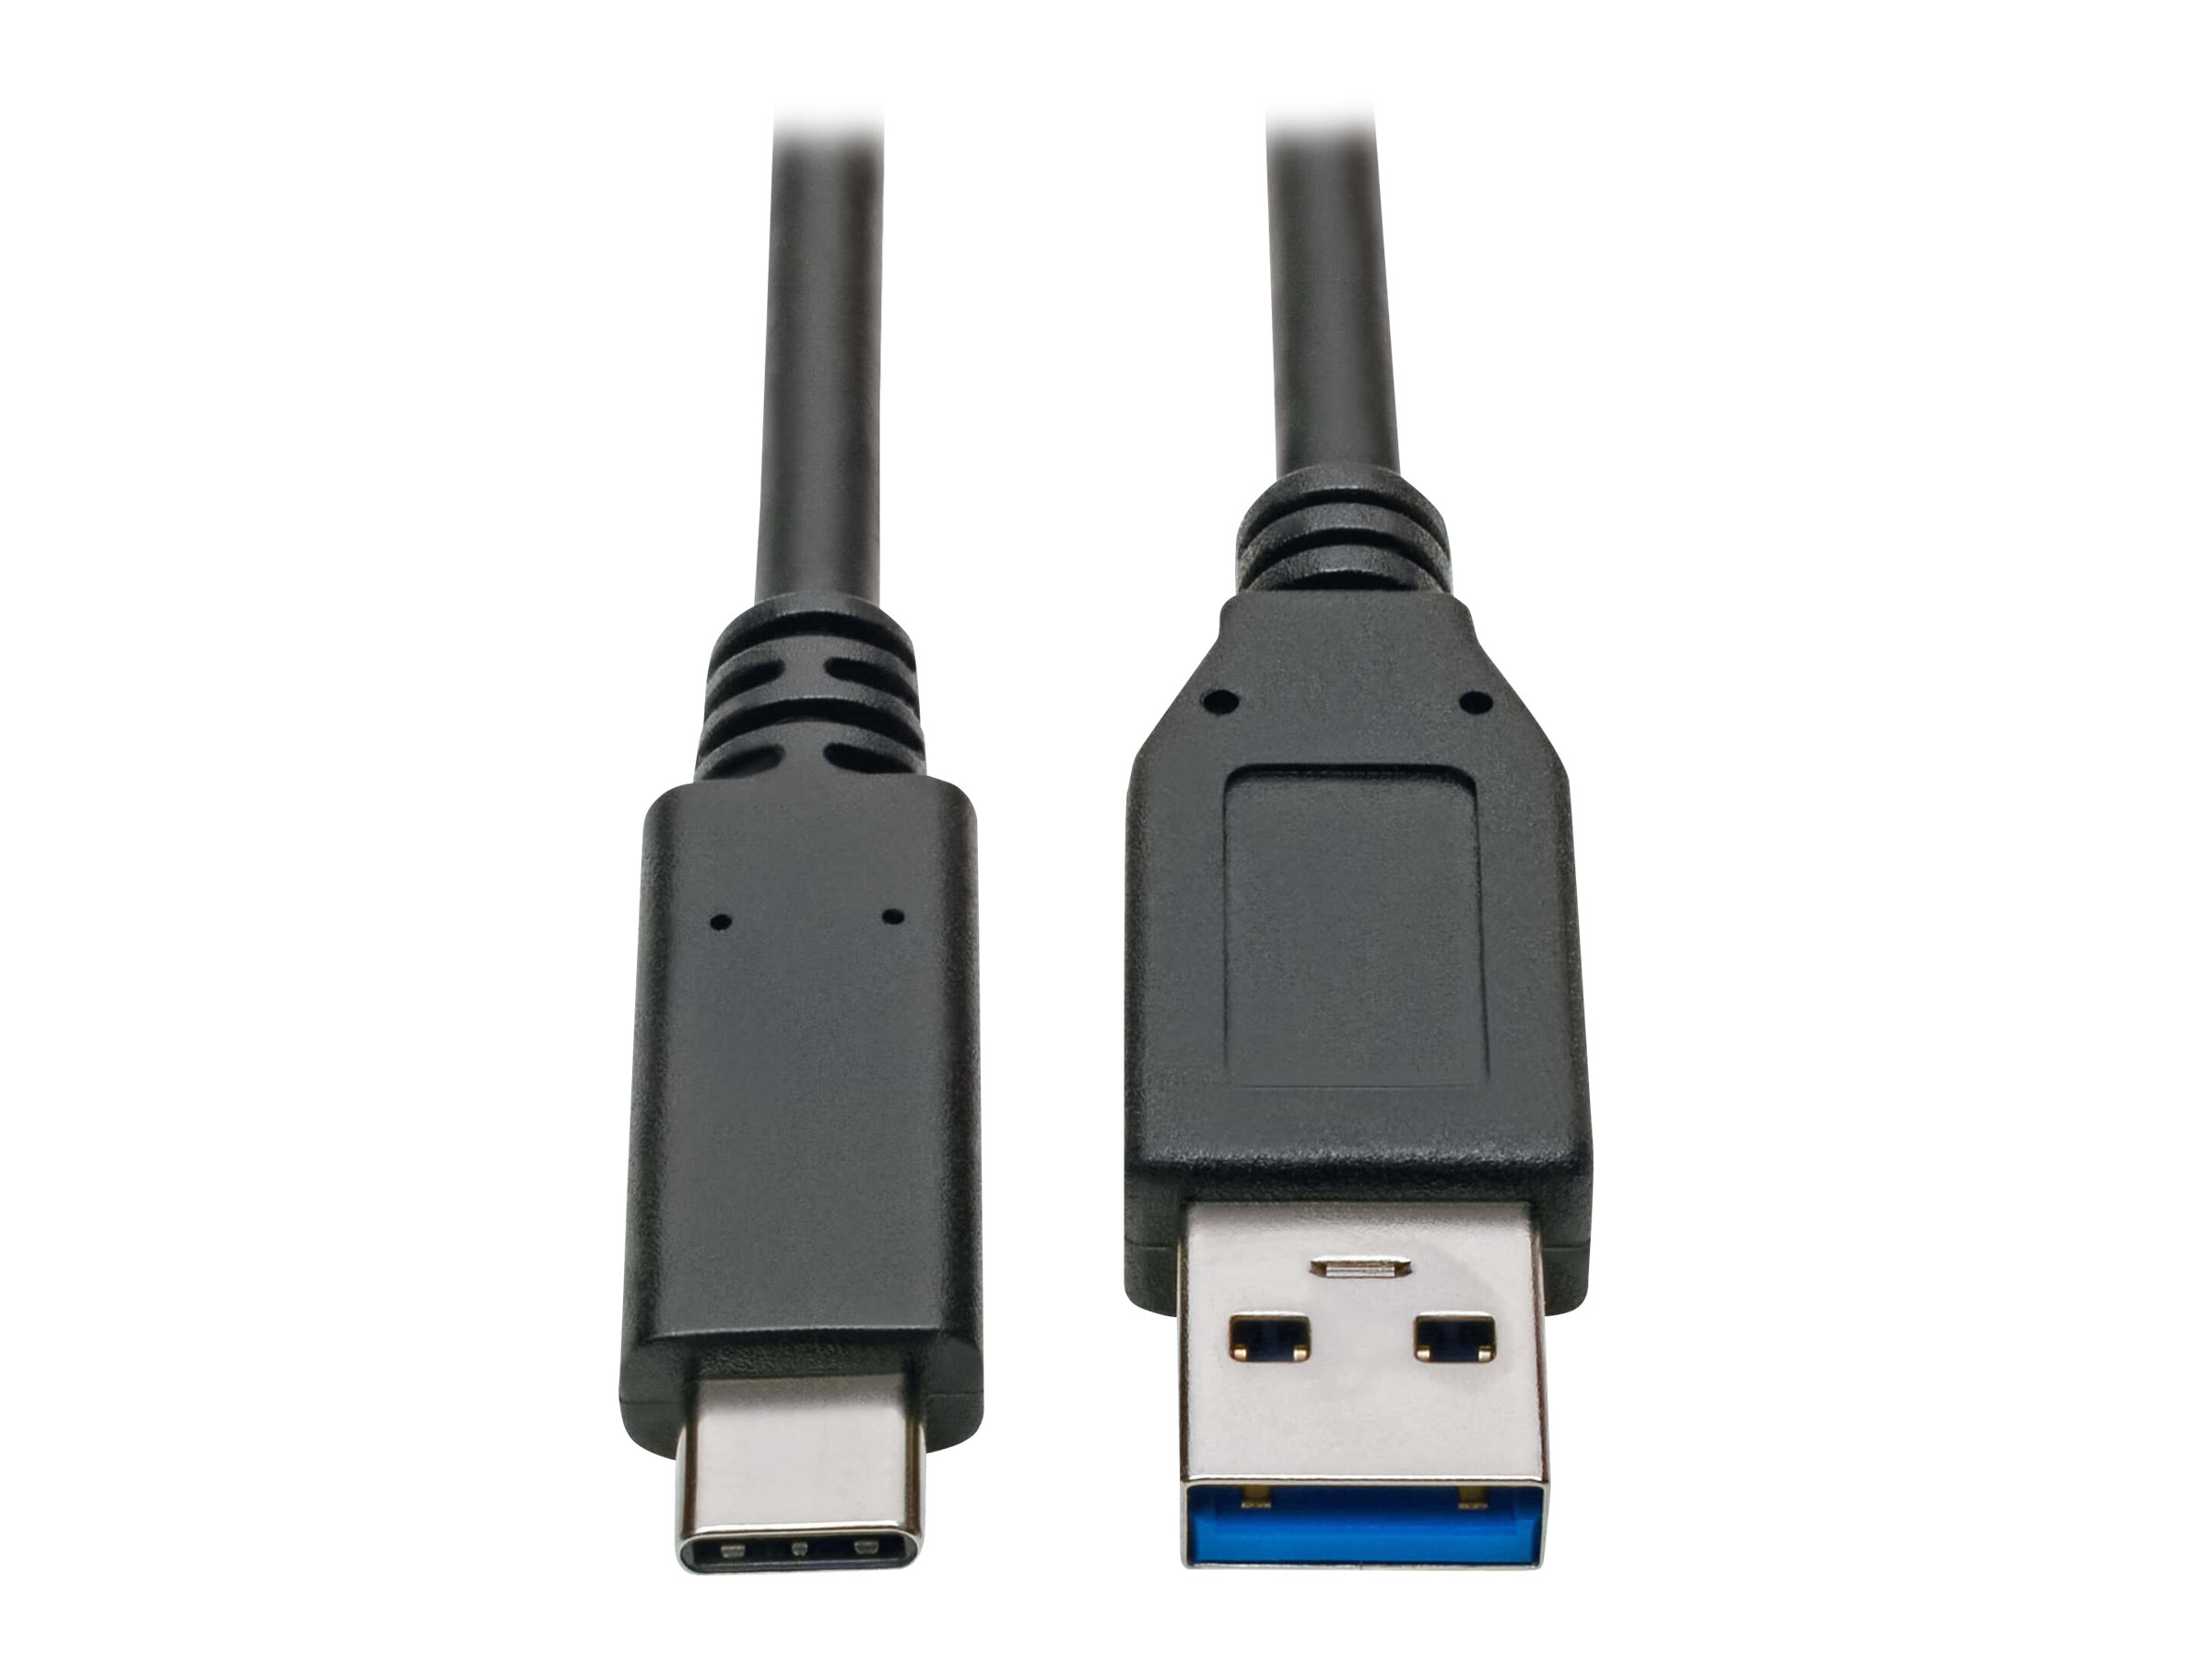 Eaton Tripp Lite Series USB-C to USB-A Cable (M/M), USB 3.2 Gen 2 (10 Gbps), USB-IF Certified, Thunderbolt 3 Compatible, 3 ft. (